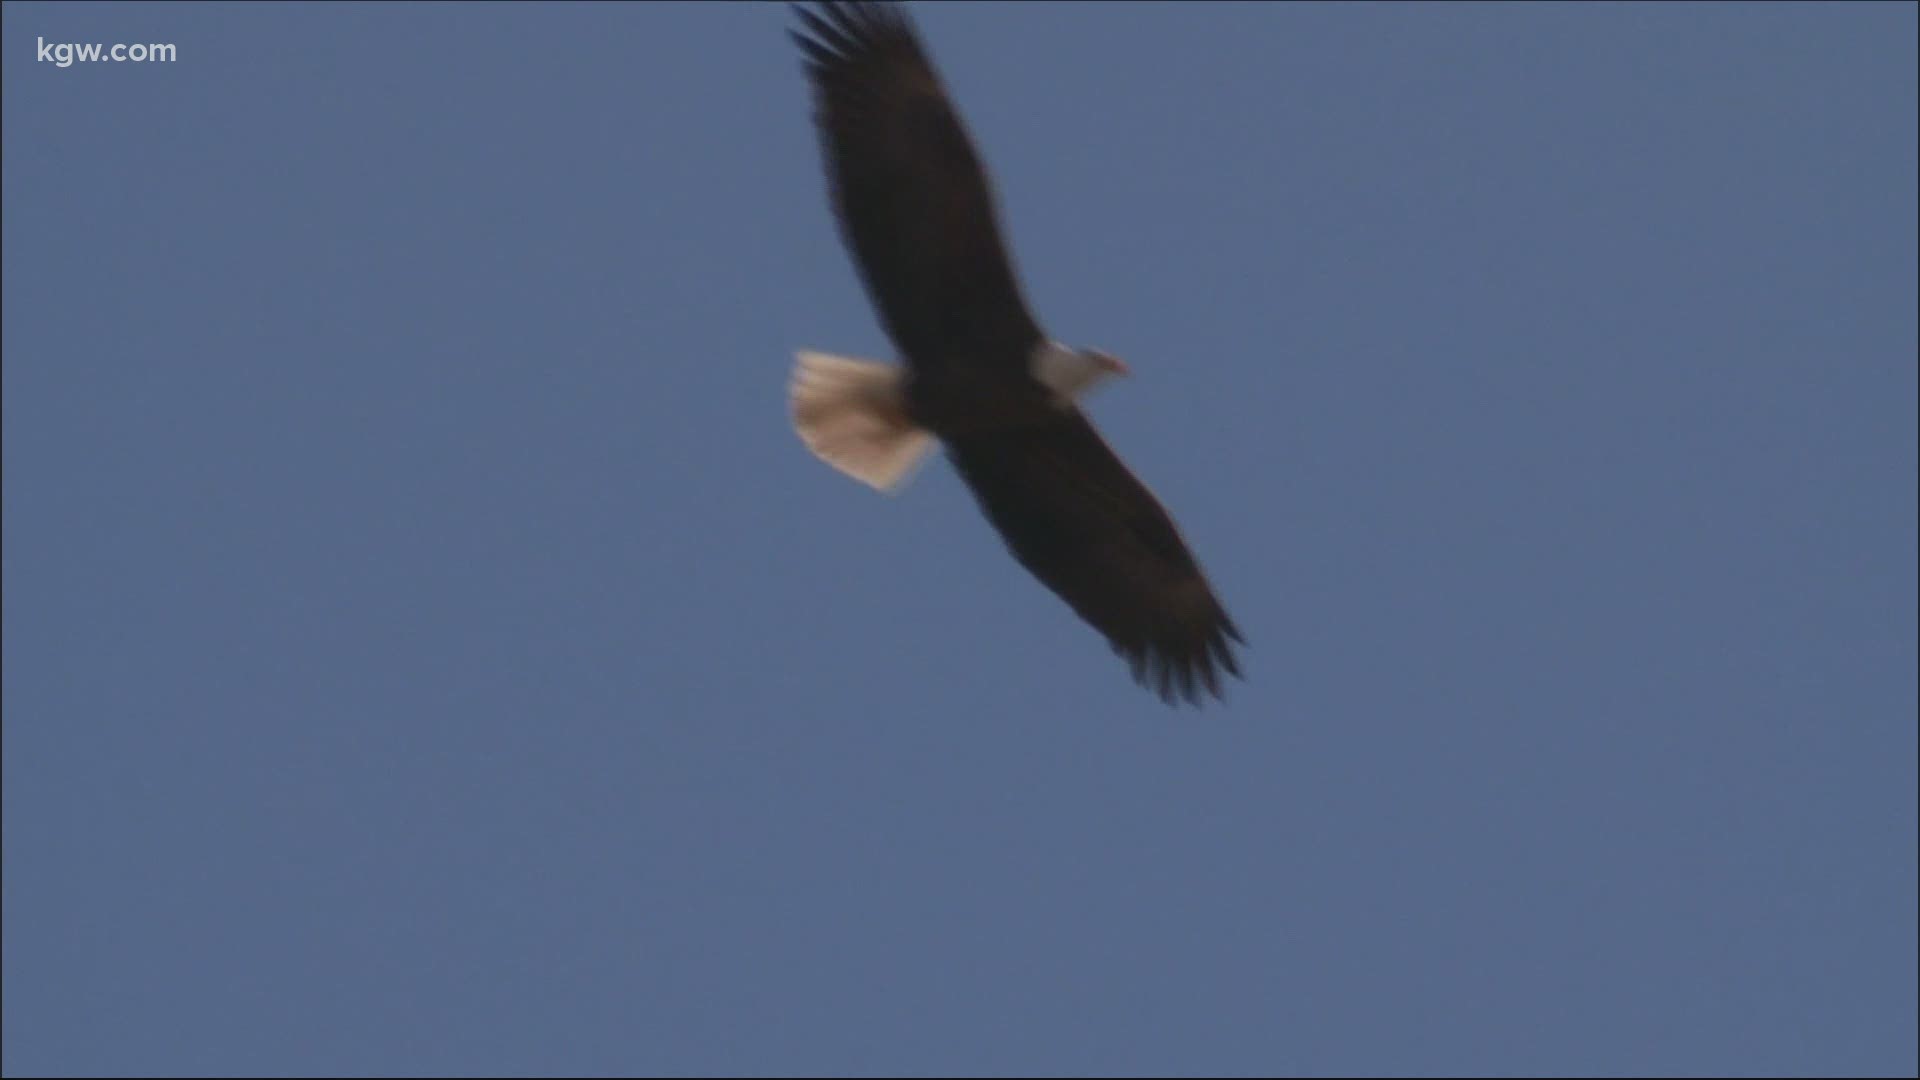 This week, Grant McOmie shows us the dawn fly-out of the largest gathering of bald eagles in America.